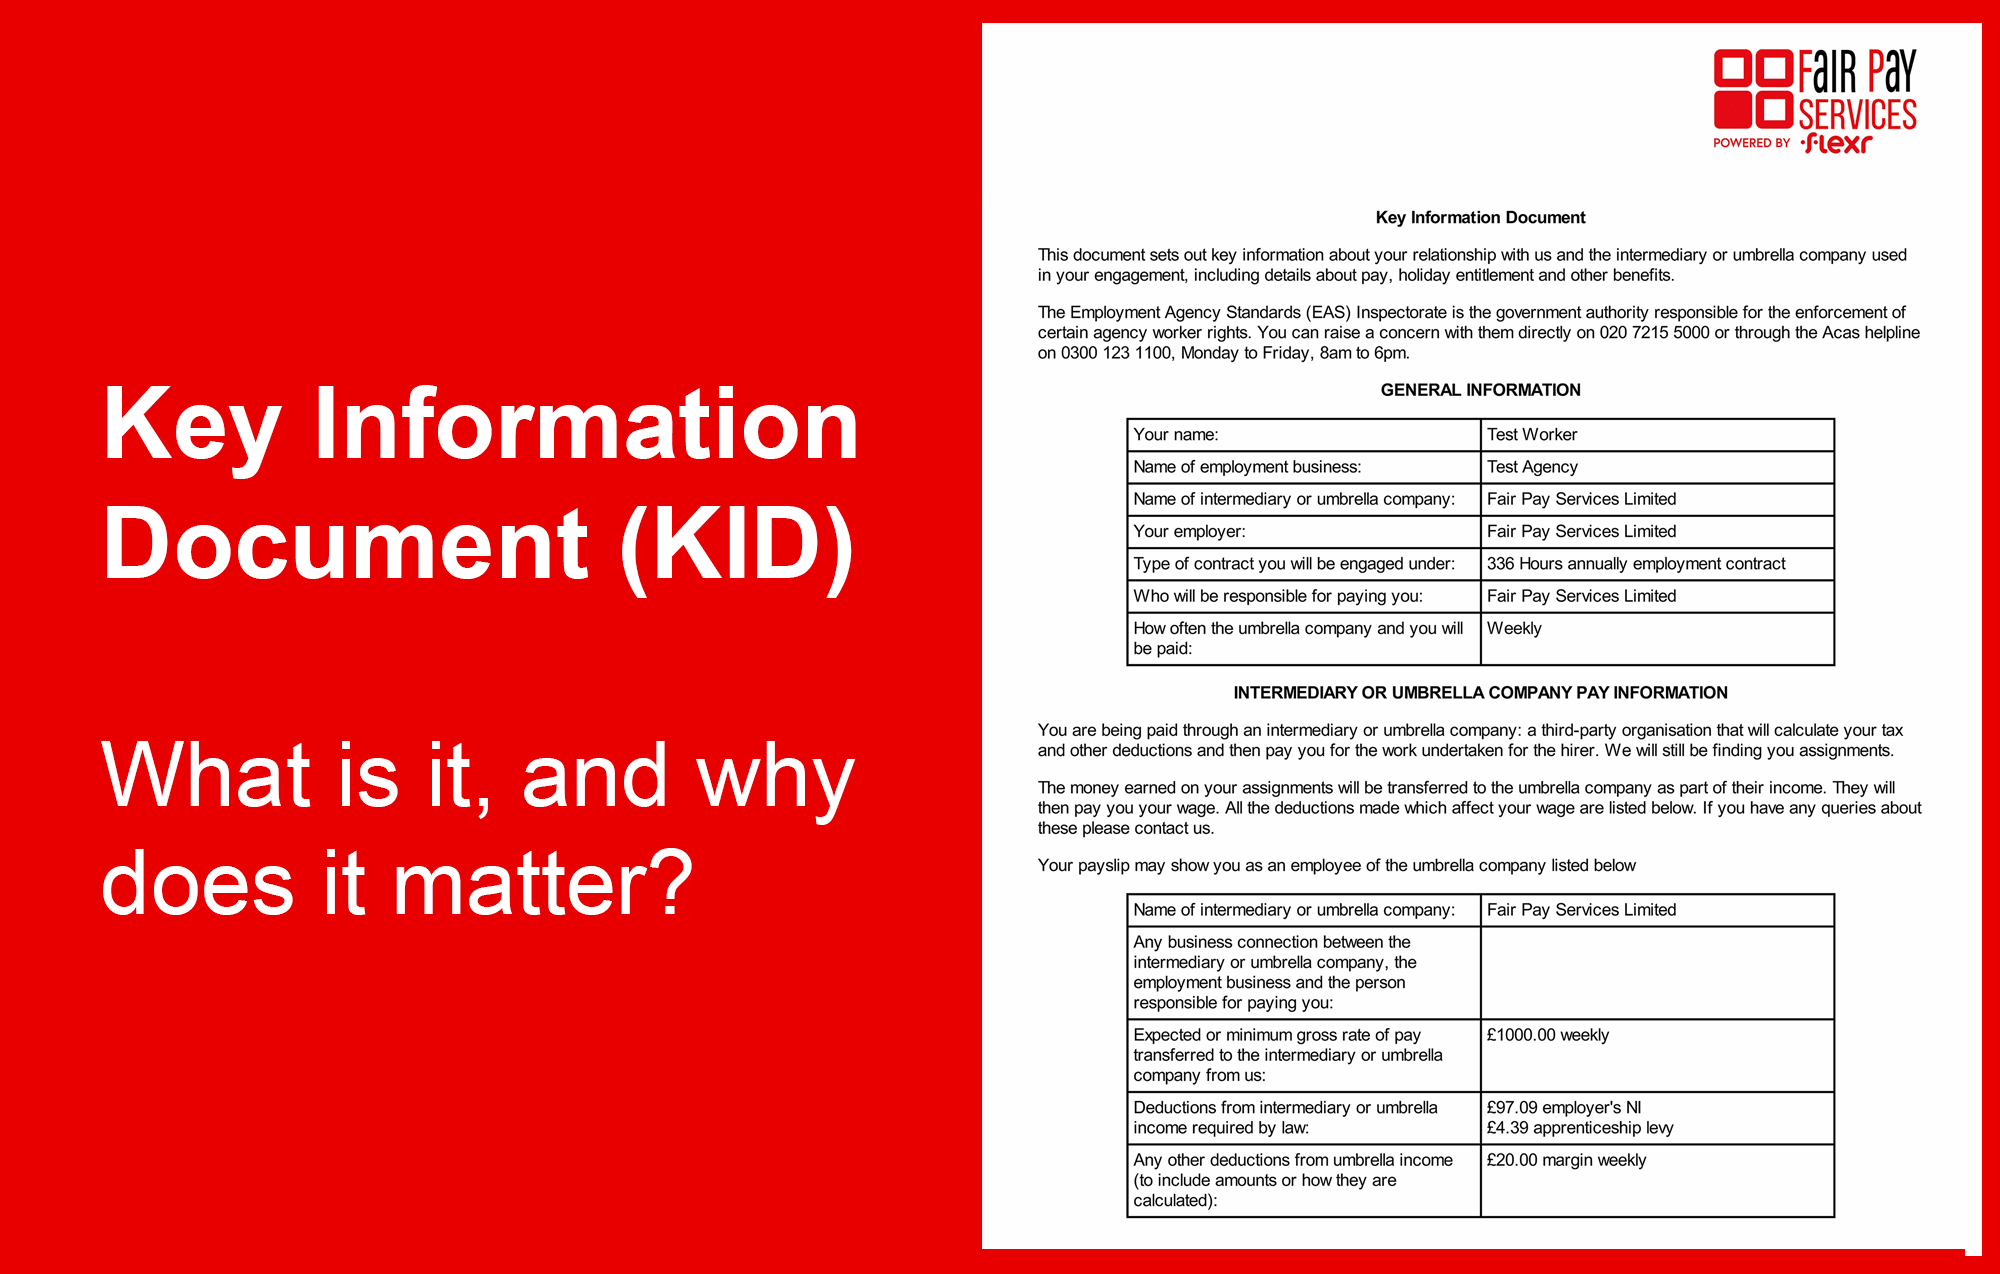 What is a Key Information Document (KID)?